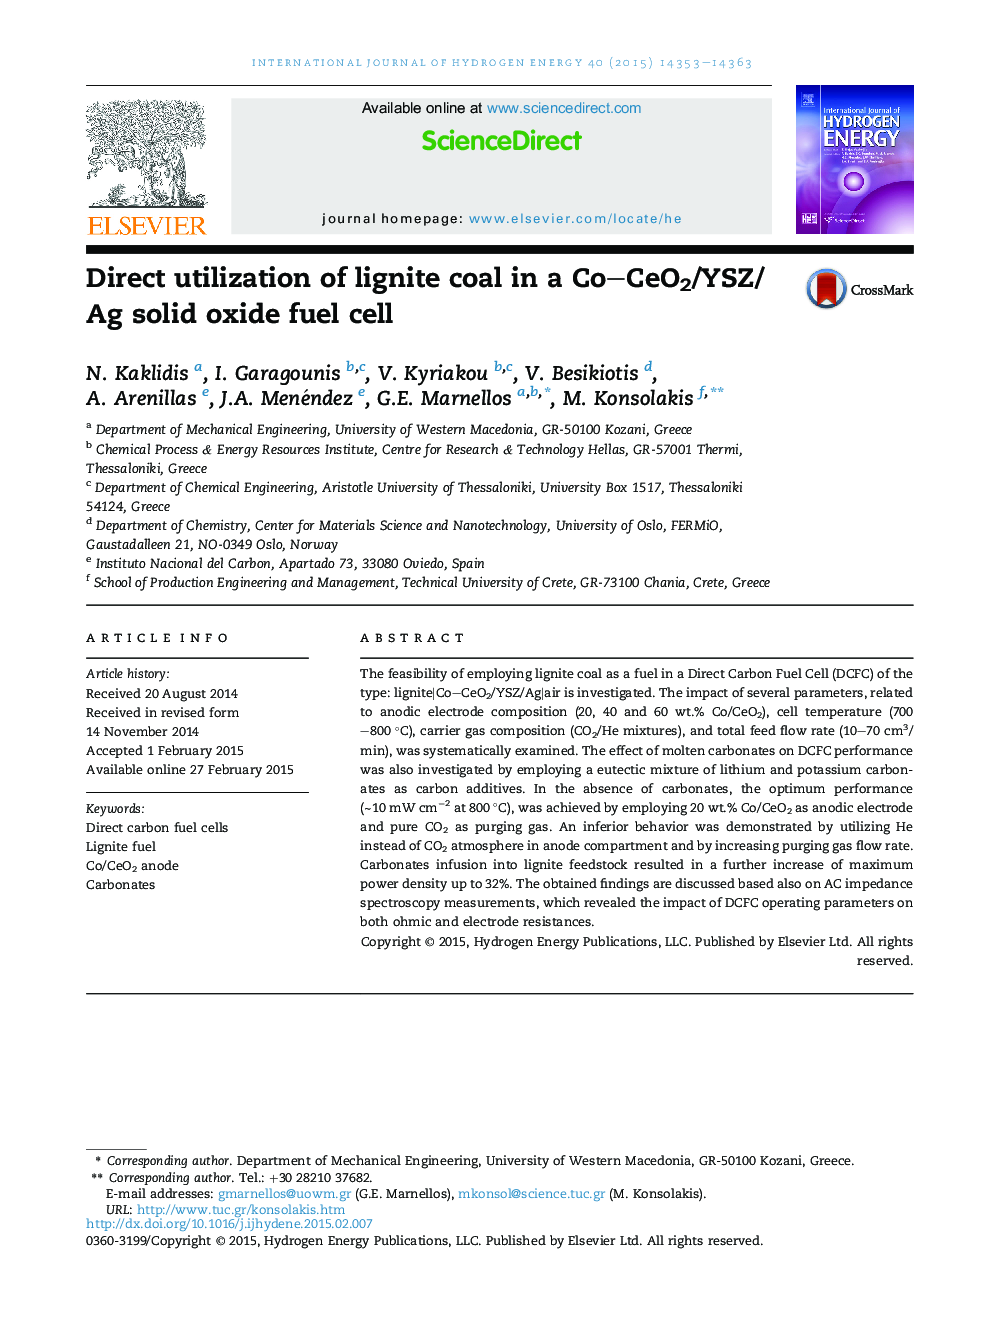 Direct utilization of lignite coal in a Co–CeO2/YSZ/Ag solid oxide fuel cell